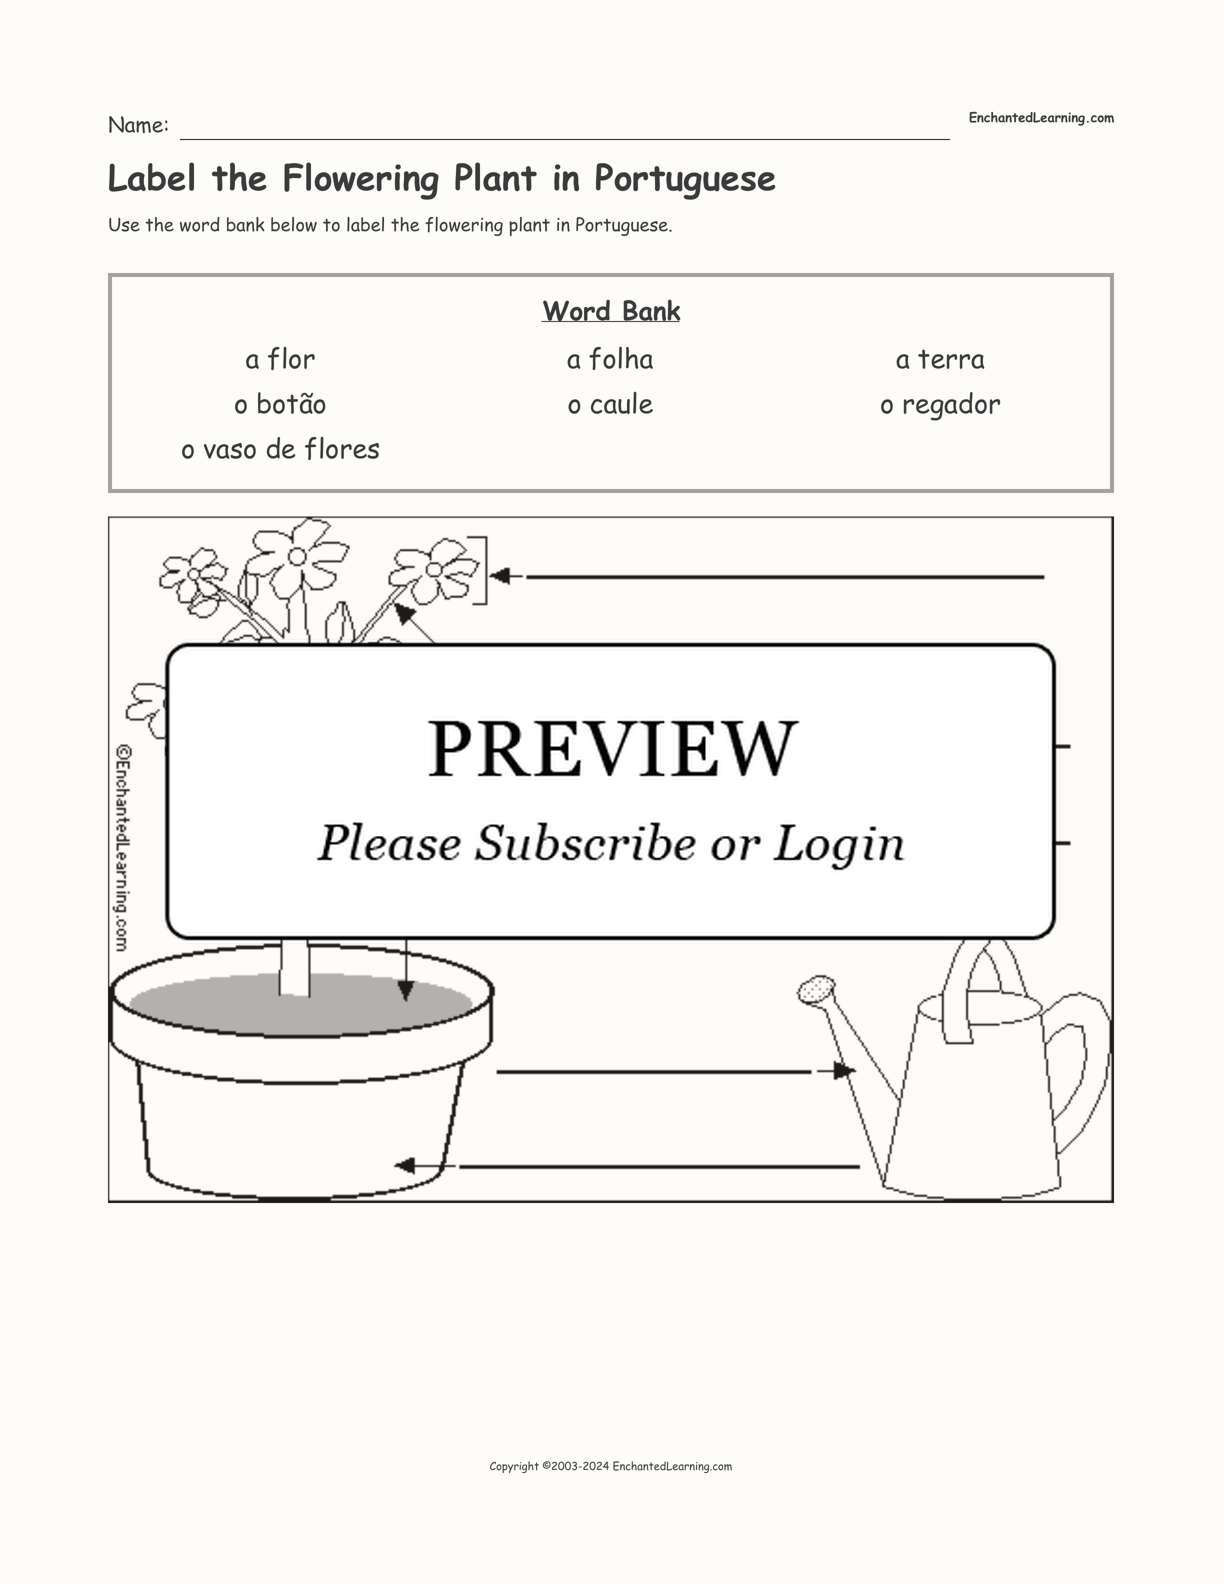 Label the Flowering Plant in Portuguese interactive worksheet page 1